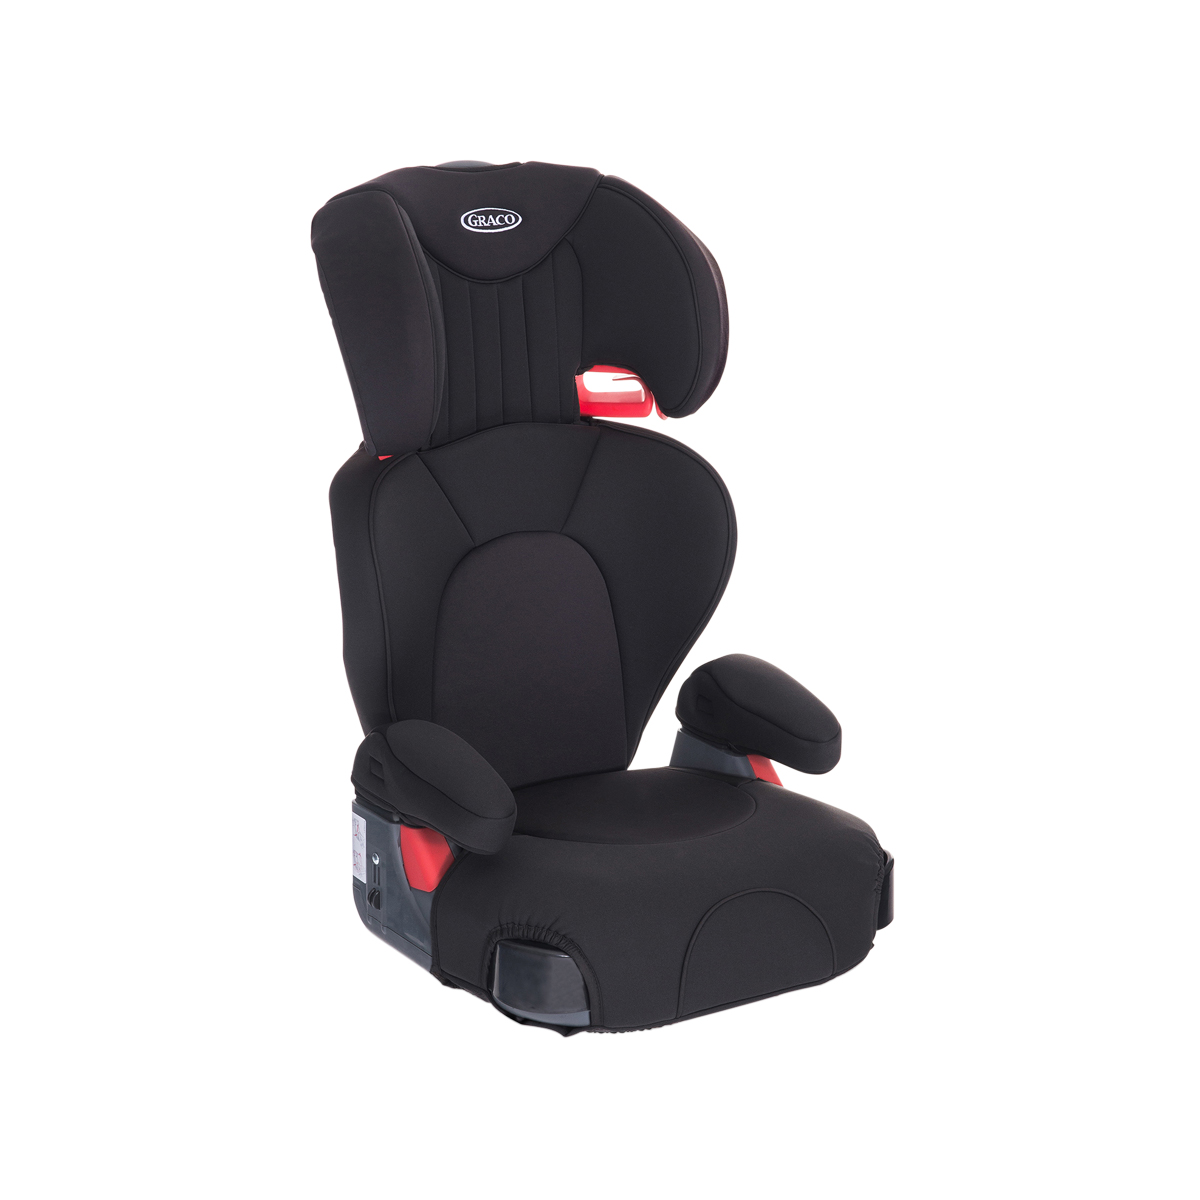 https://dd.gracobaby.eu/media/catalog/product/l/o/logicol_black-prod1_1.jpg?type=product&height=265&width=265